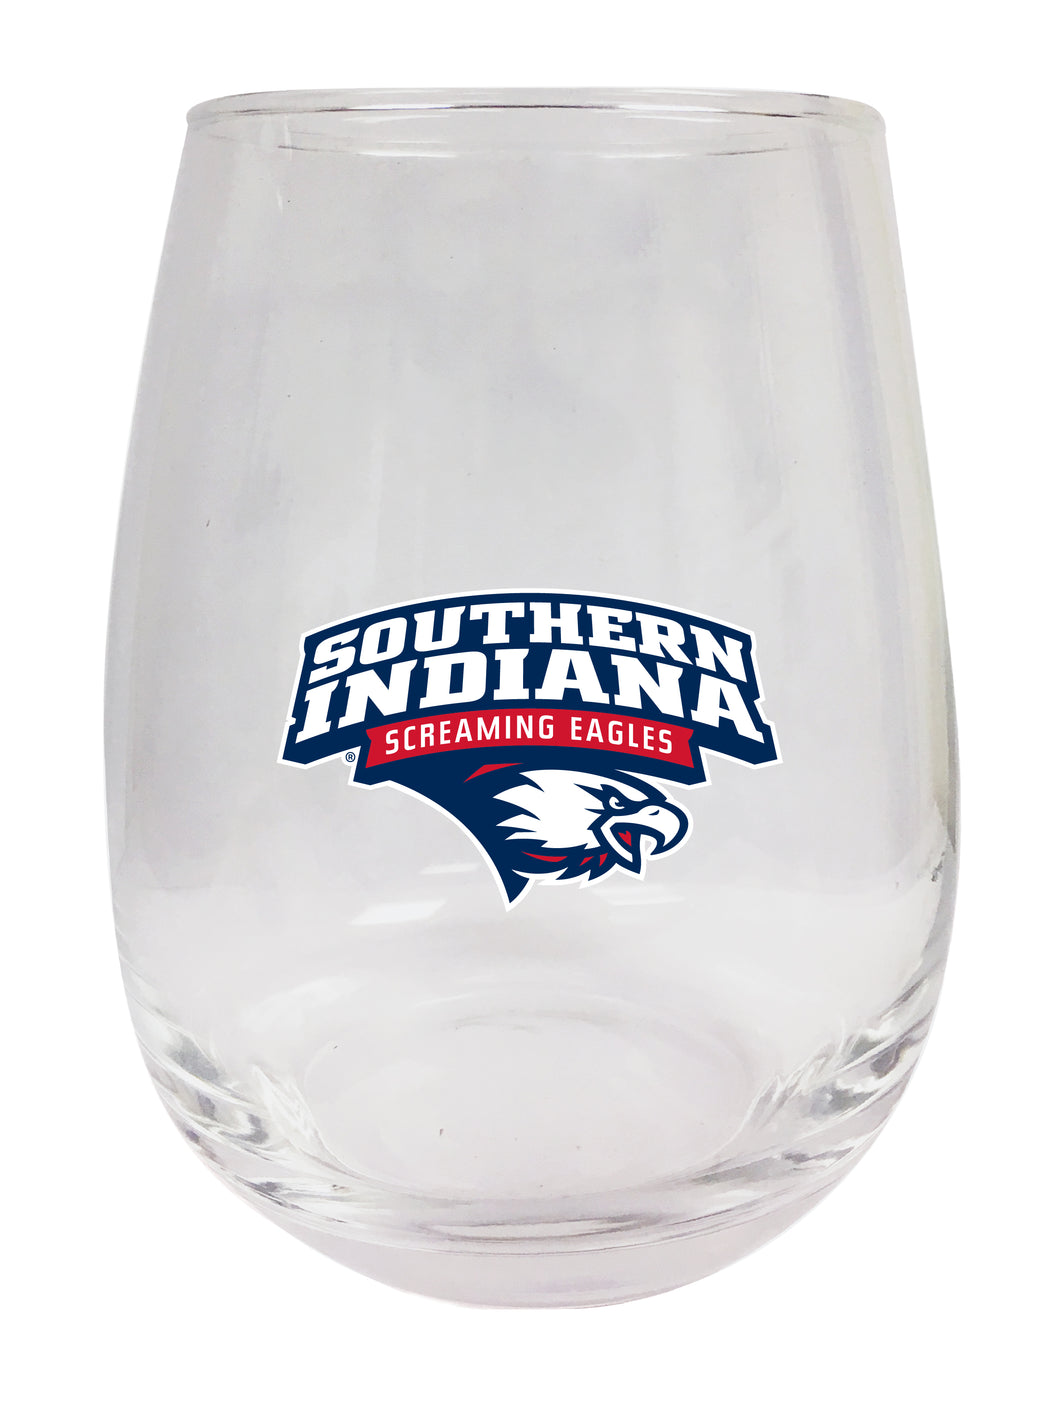 University of Southern Indiana Stemless Wine Glass - 9 oz. | Officially Licensed NCAA Merchandise